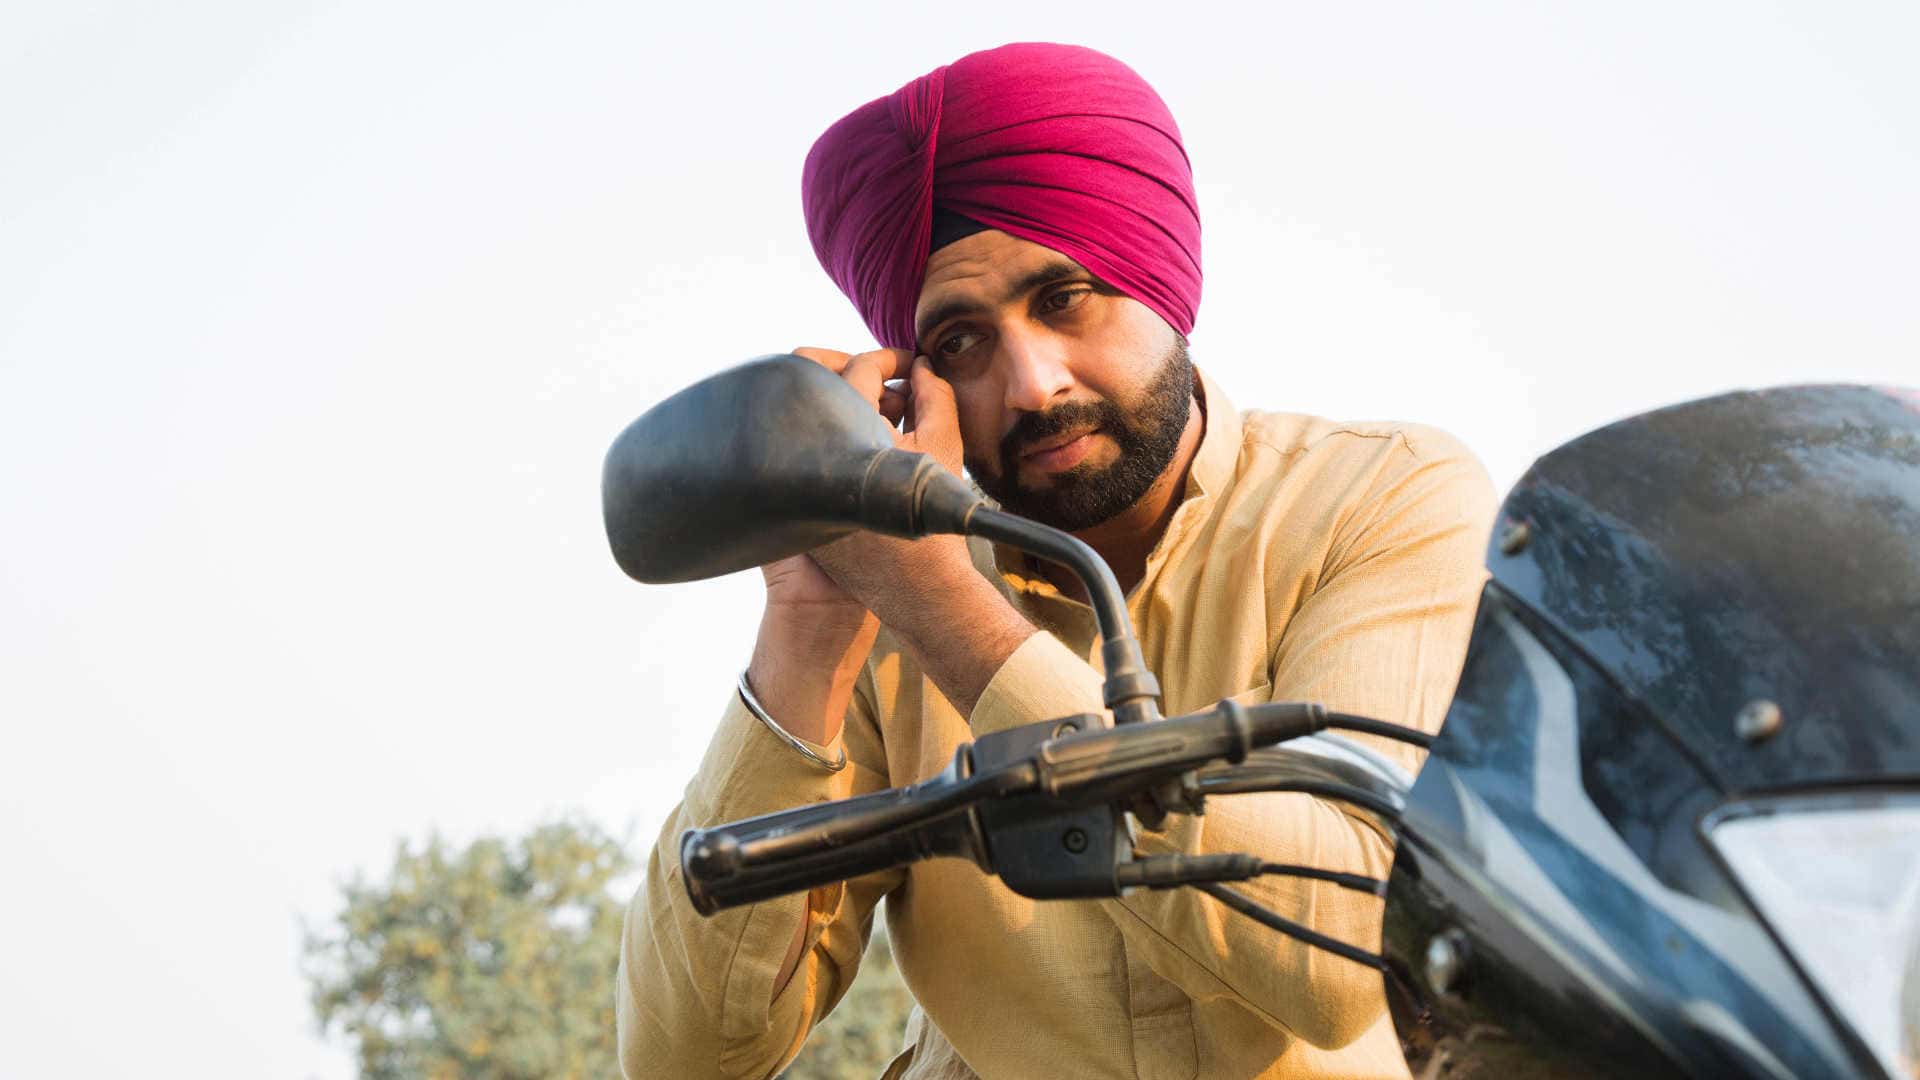 Sikh male on motorcycle wearing turban without a helmet